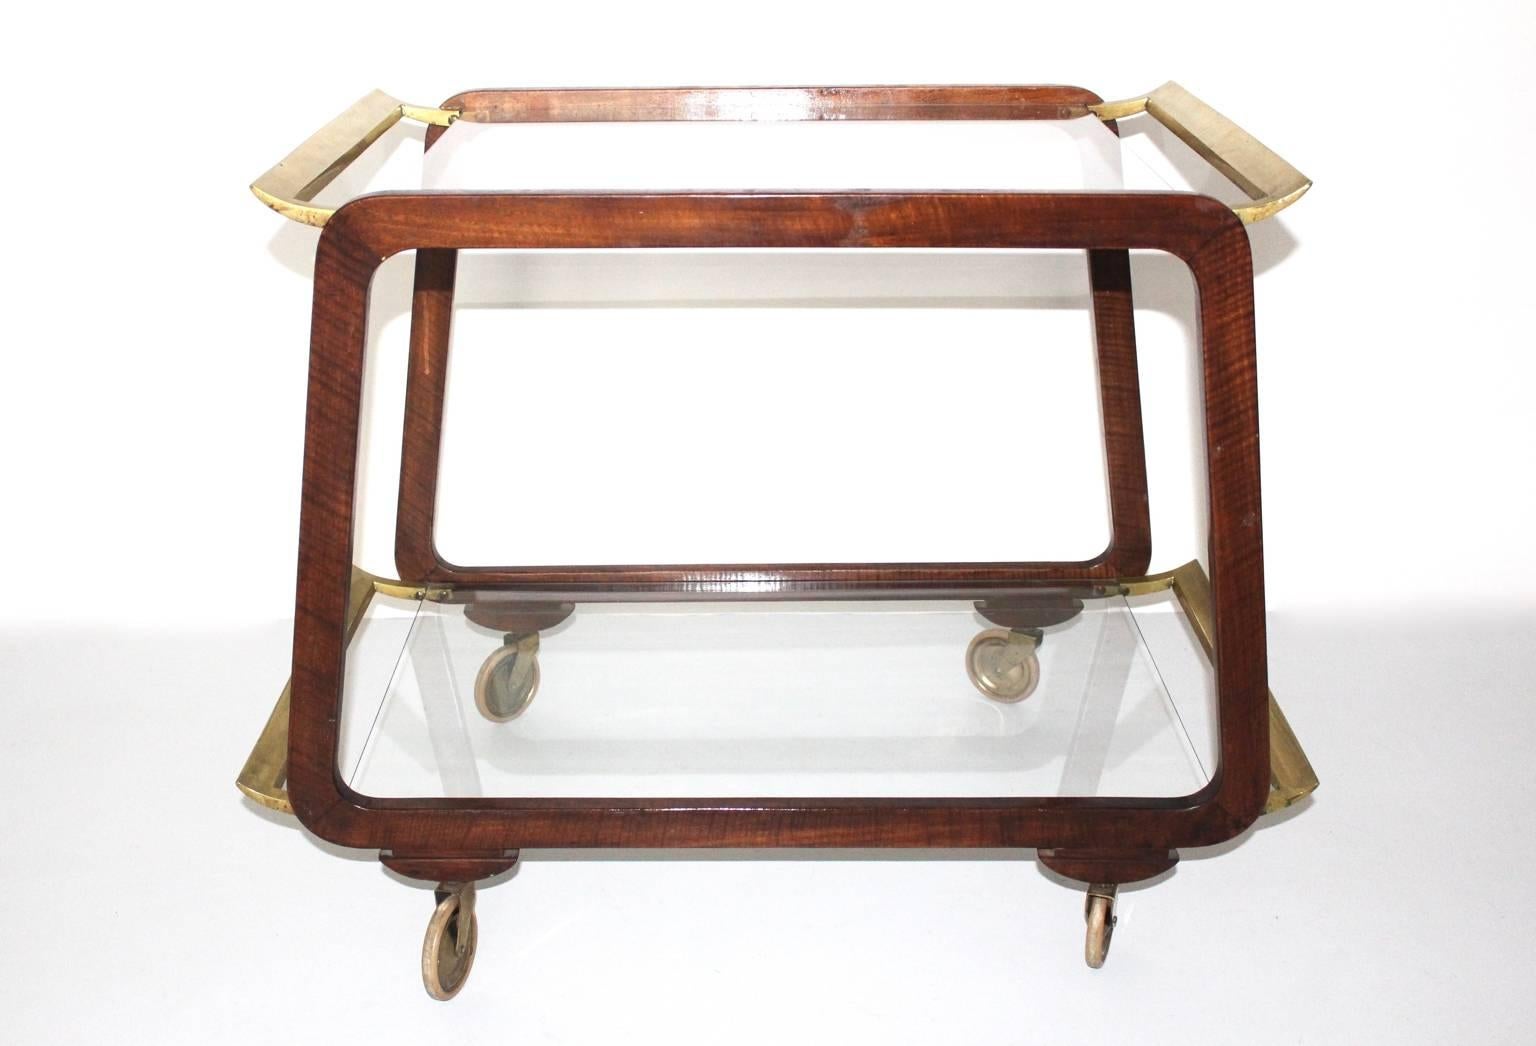 Mid Century Modern beautiful bar cart or serving trolley  designed and executed in Vienna in the 1960s. While the walnut frame and a brass reling refinish the look, two clear glass tiers gives the cart elegance.
Very good vintage condition with